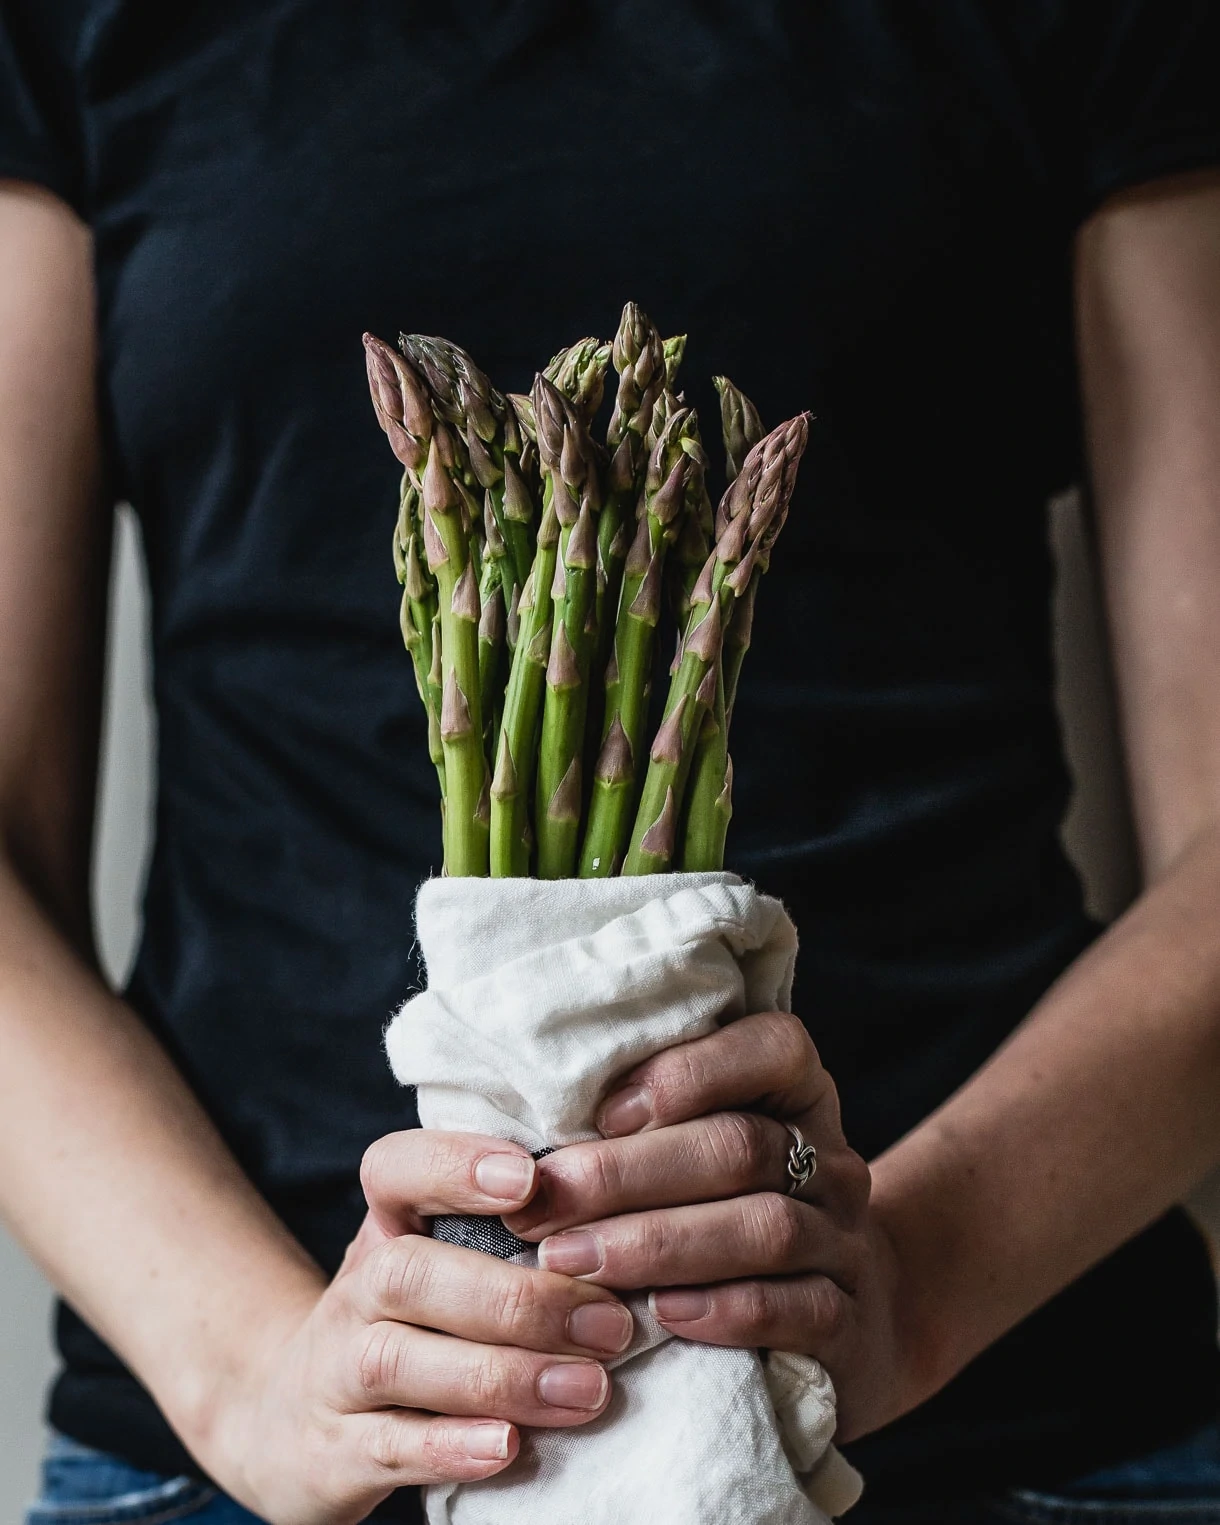 Spring asparagus // photography // food styling